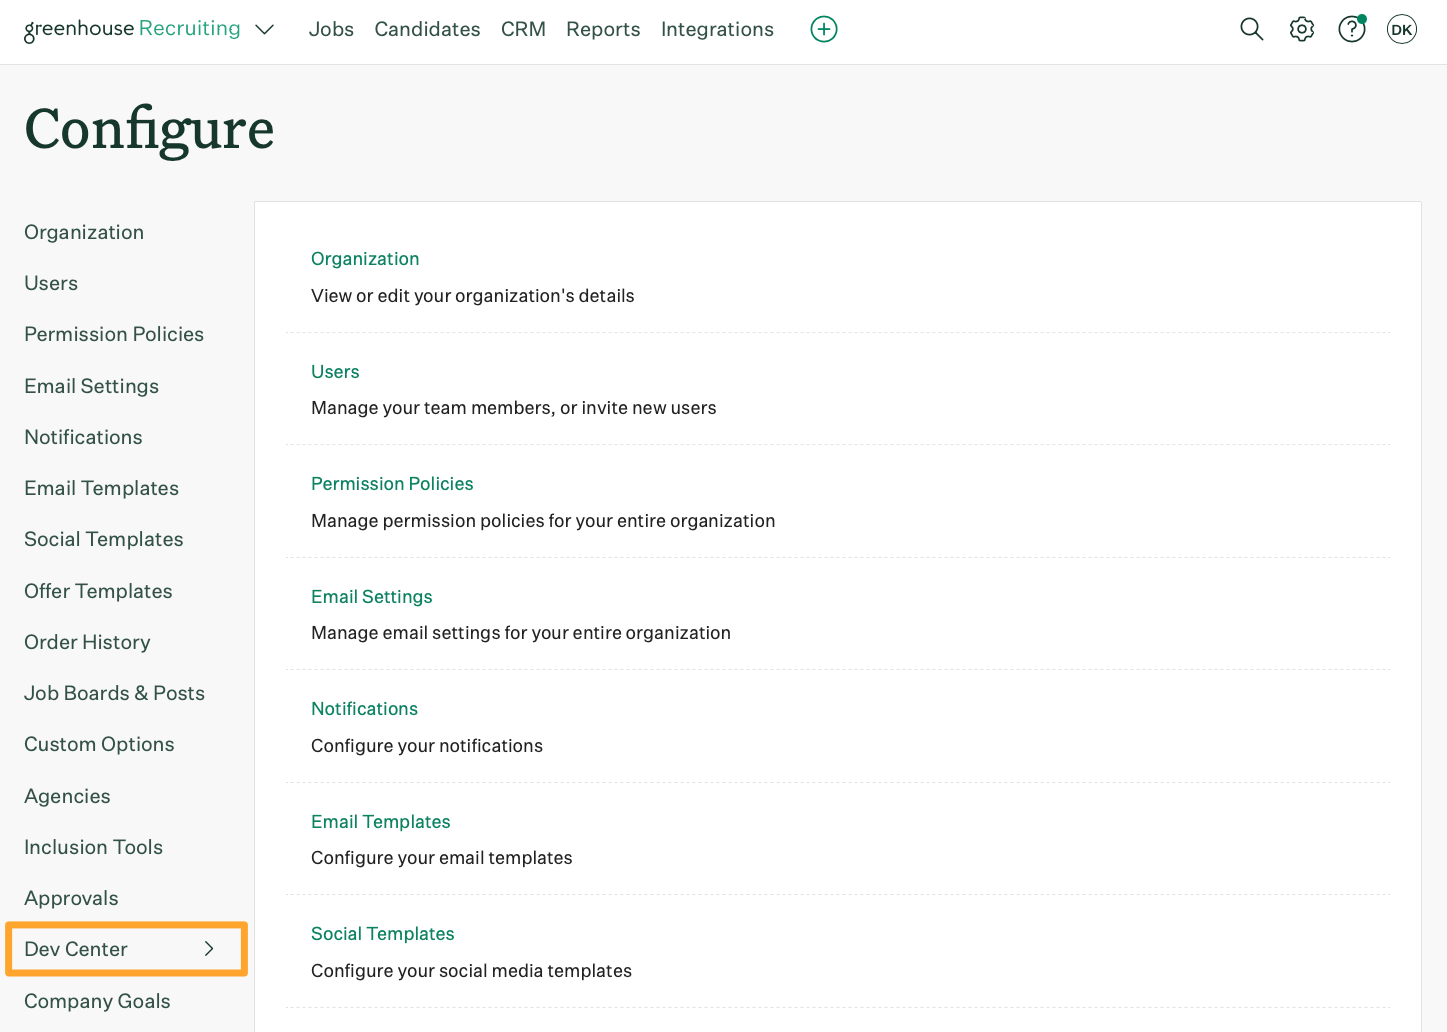 Configure page with Dev Center highlighted in marigold emphasis box